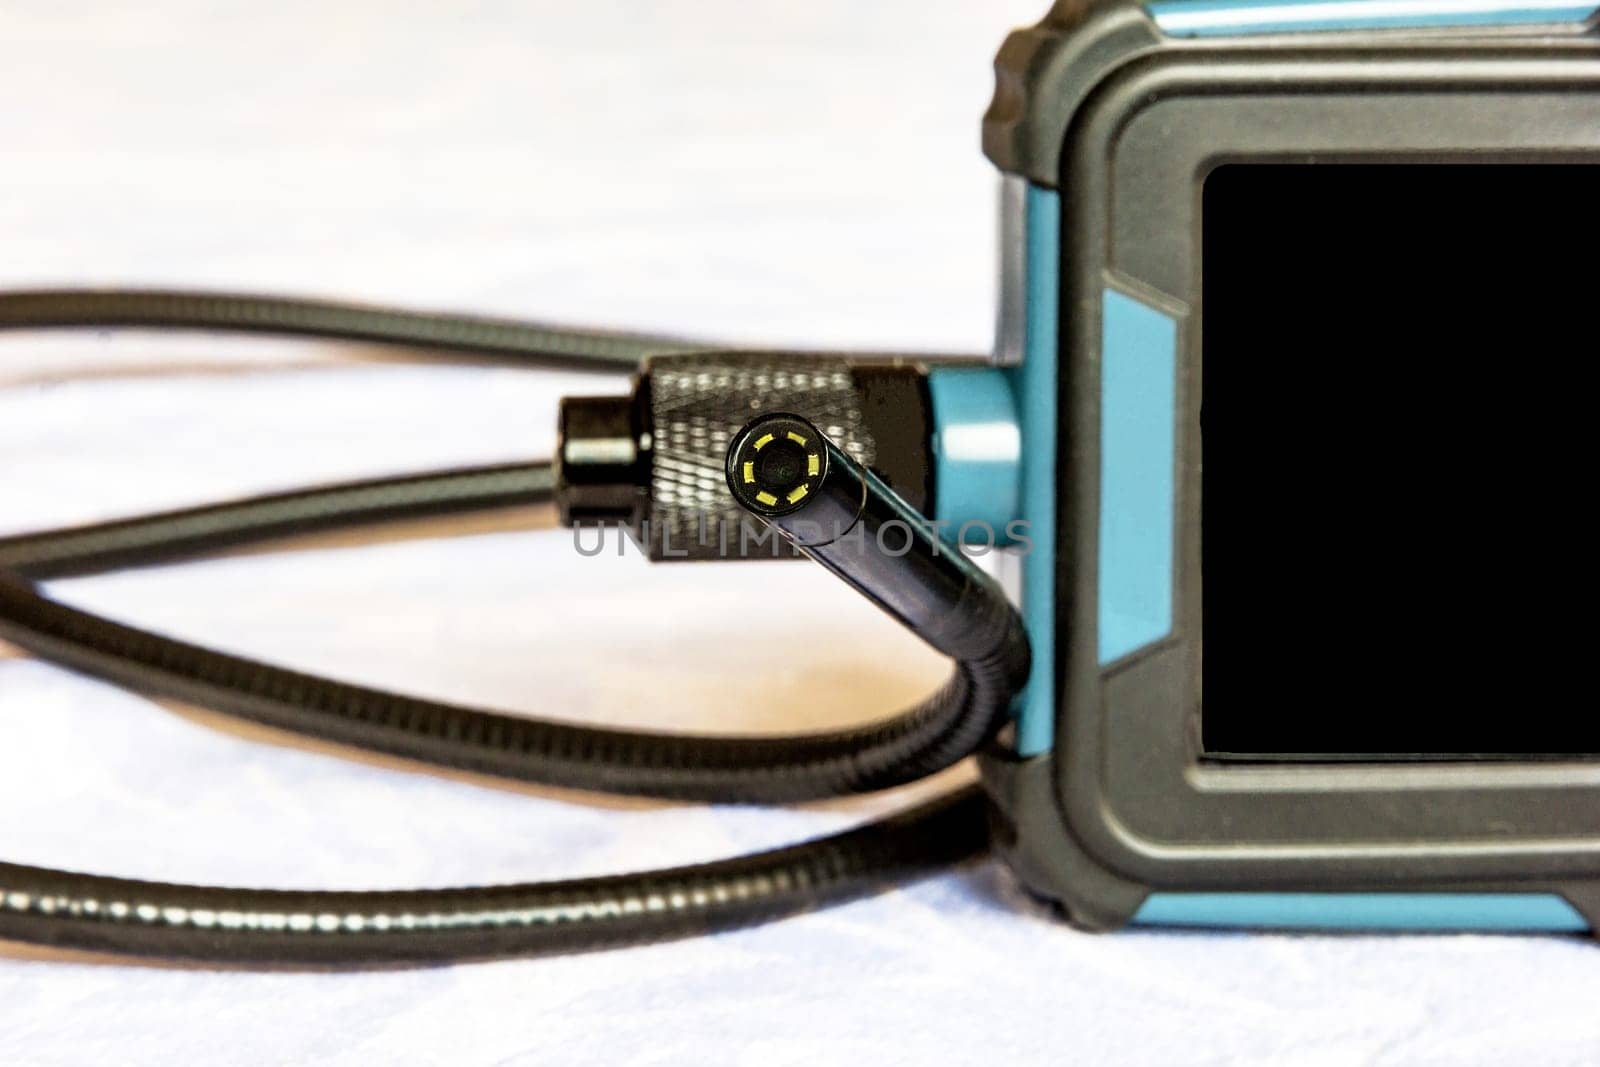 Endoscope camera on the table. Flexible inspection camera by EdVal